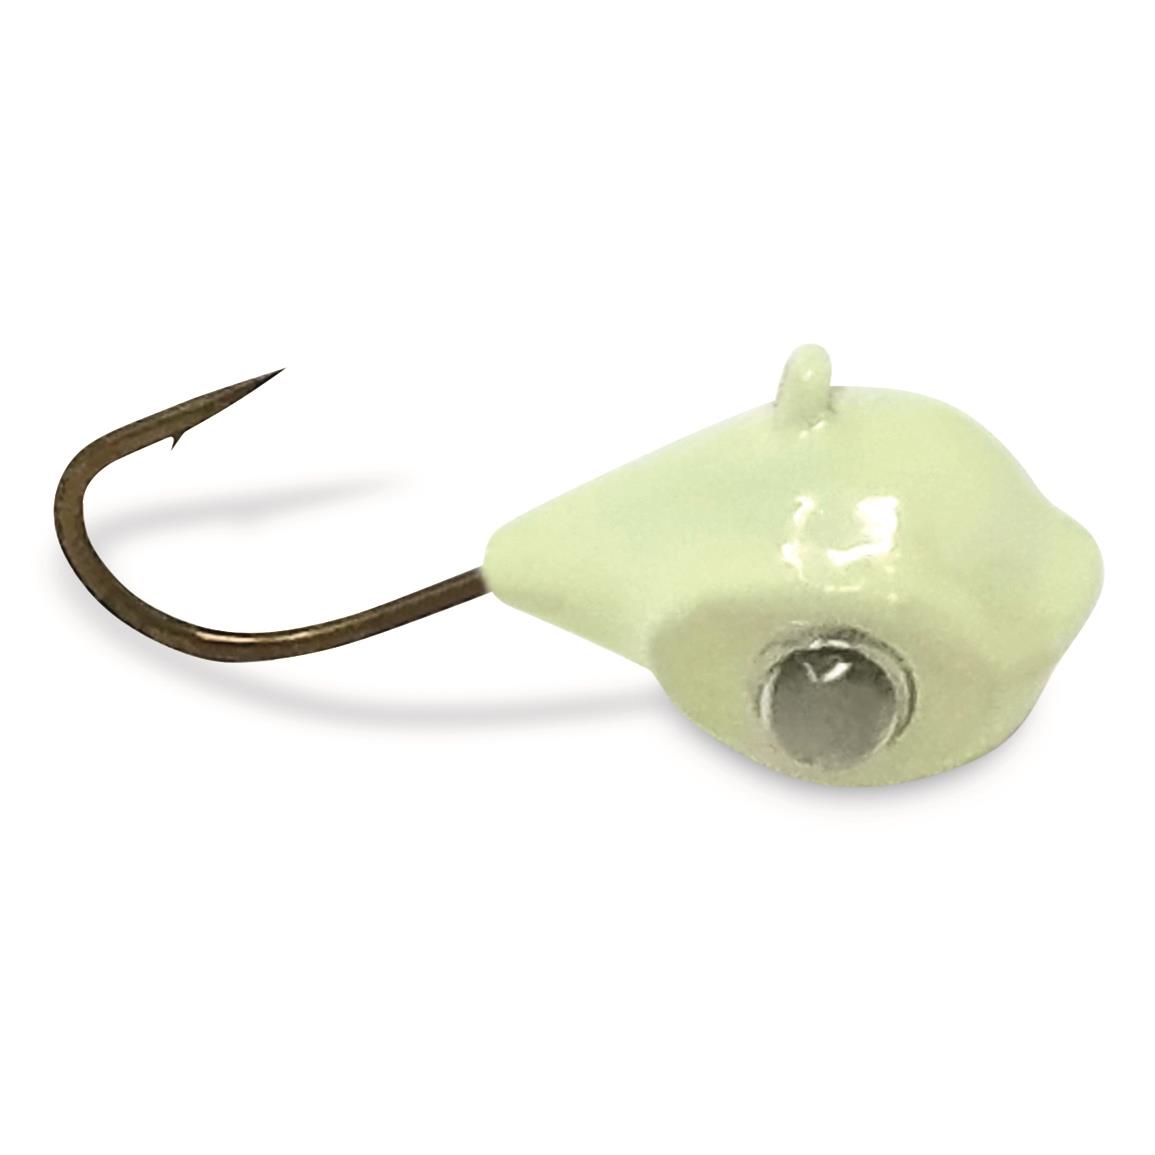 Northland Tungsten Flat Fry Jig - 737312, Ice Tackle at